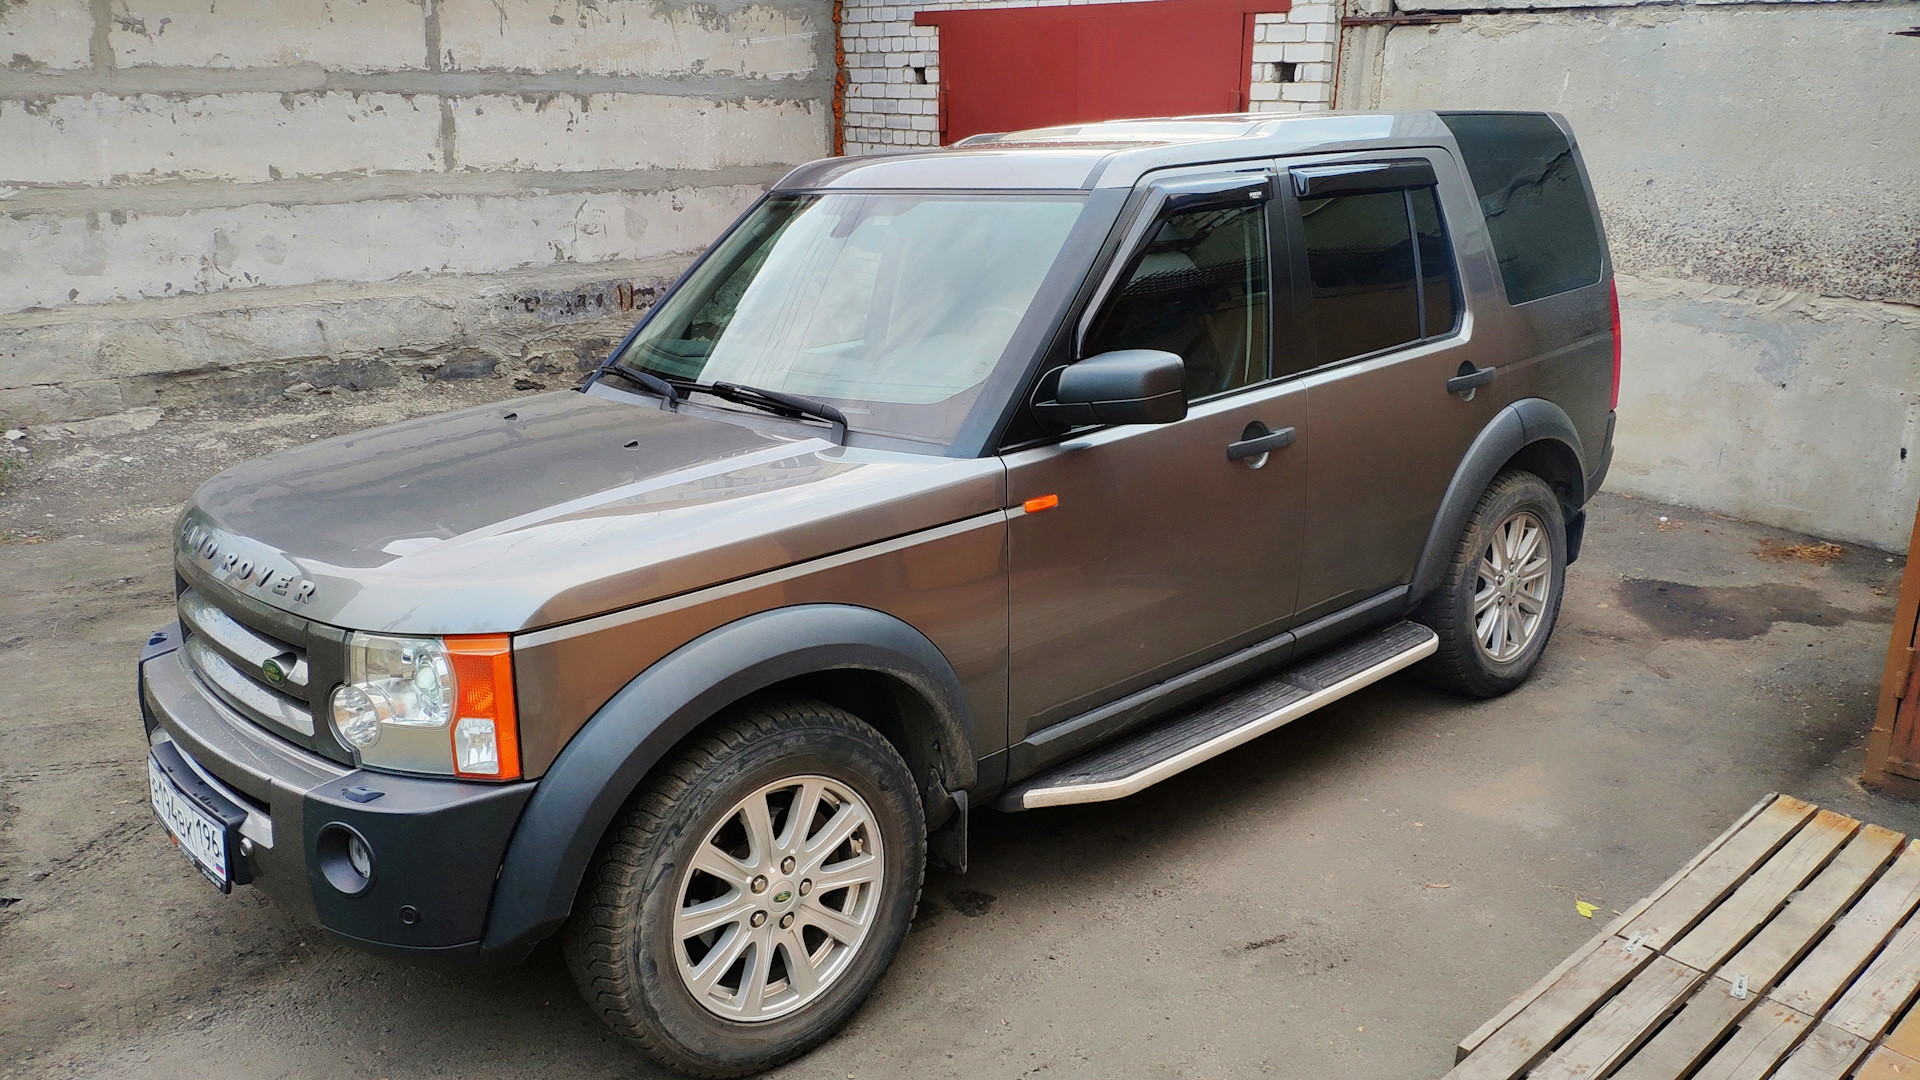 Дискавери 3 2008. Дискавери 3 2.7 дизель. Discovery 3. Радиаторы Discovery 3 2.7.